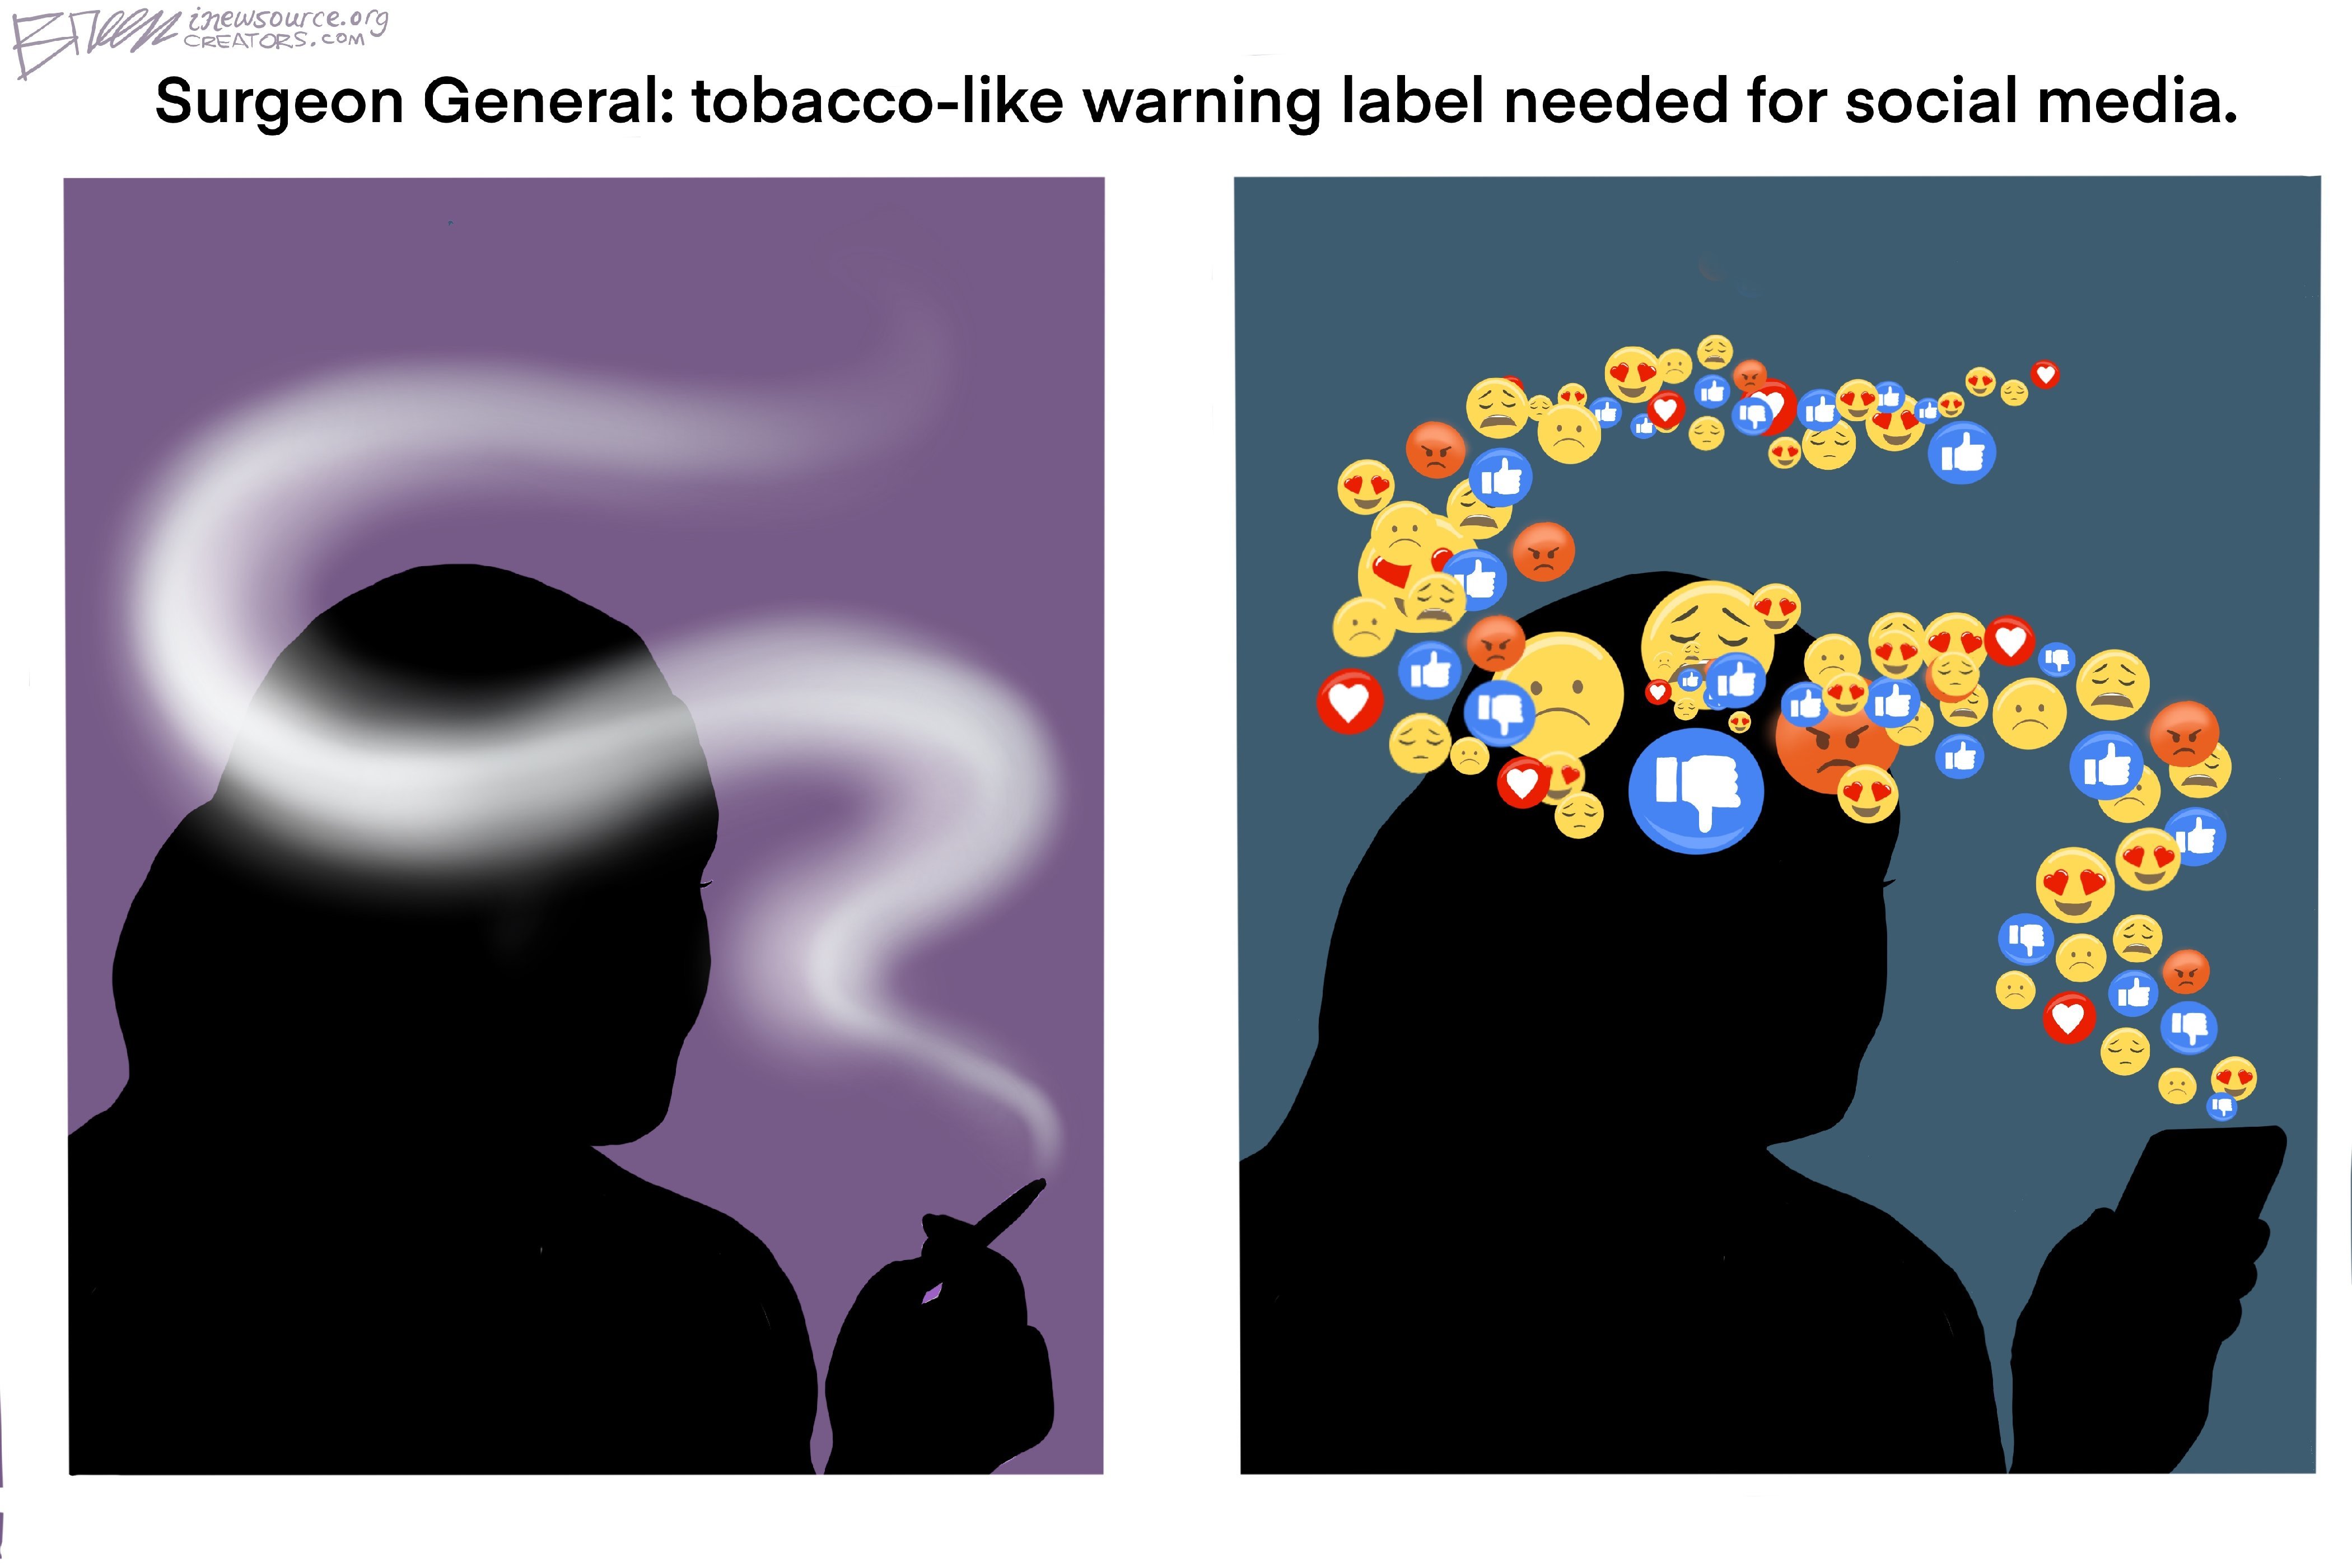 5 scathing cartoons about health warnings on social media